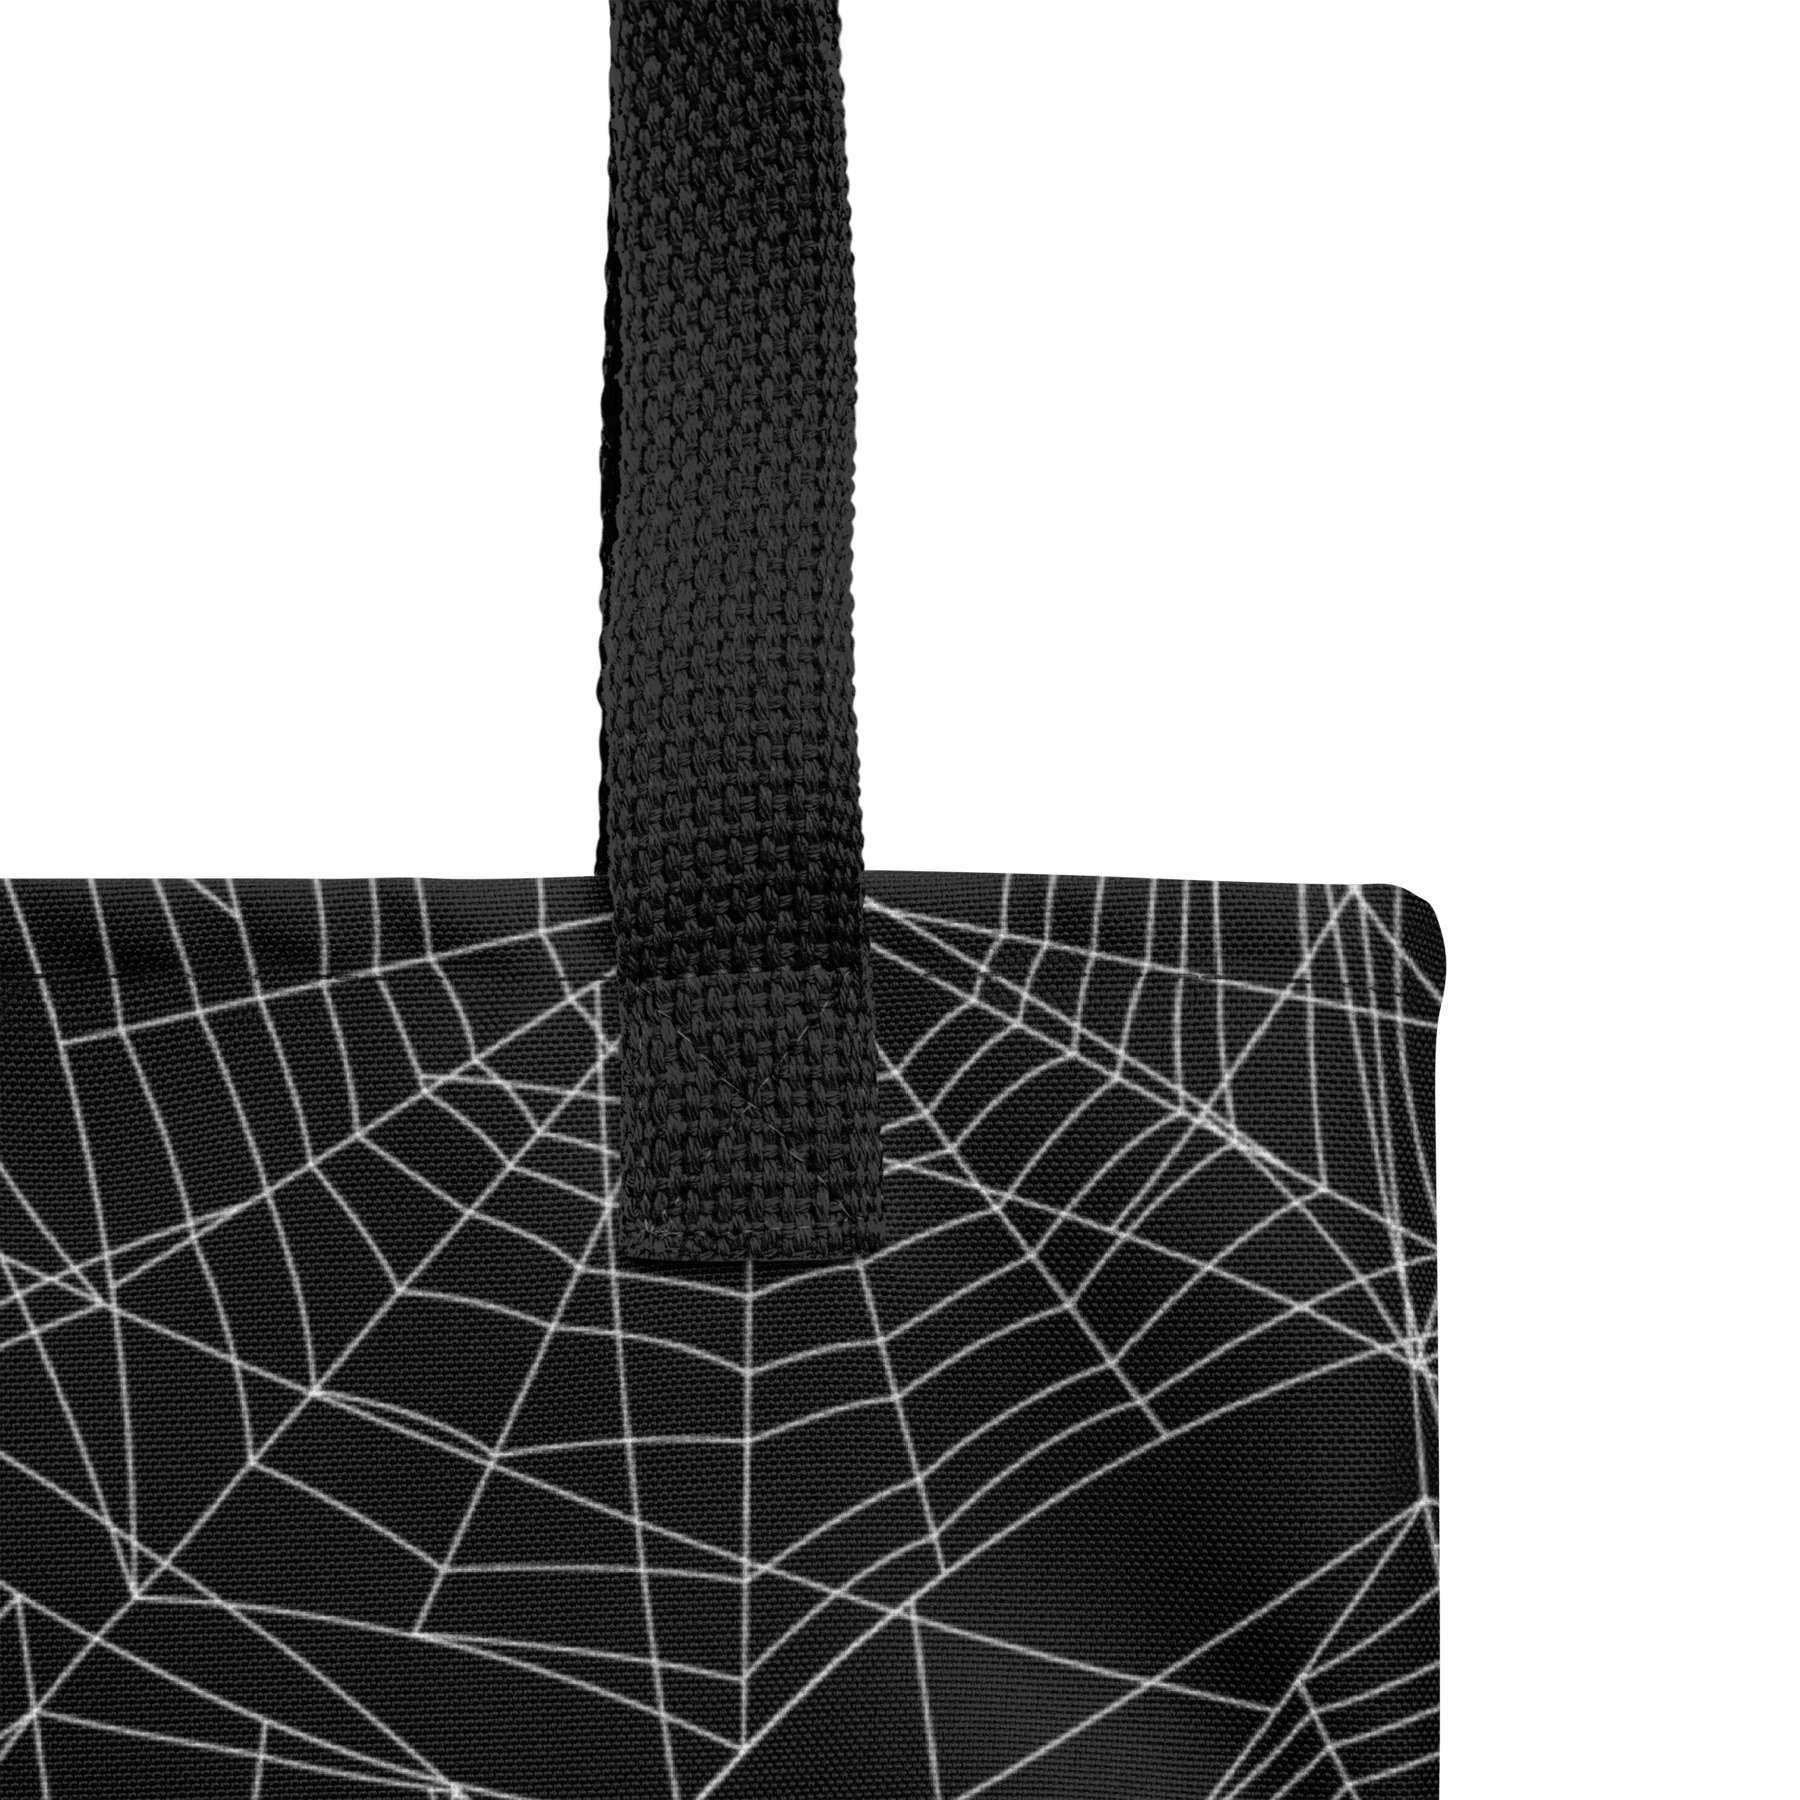 Spider Chic Tote Bag - Goth Cloth Co.2316787_4533